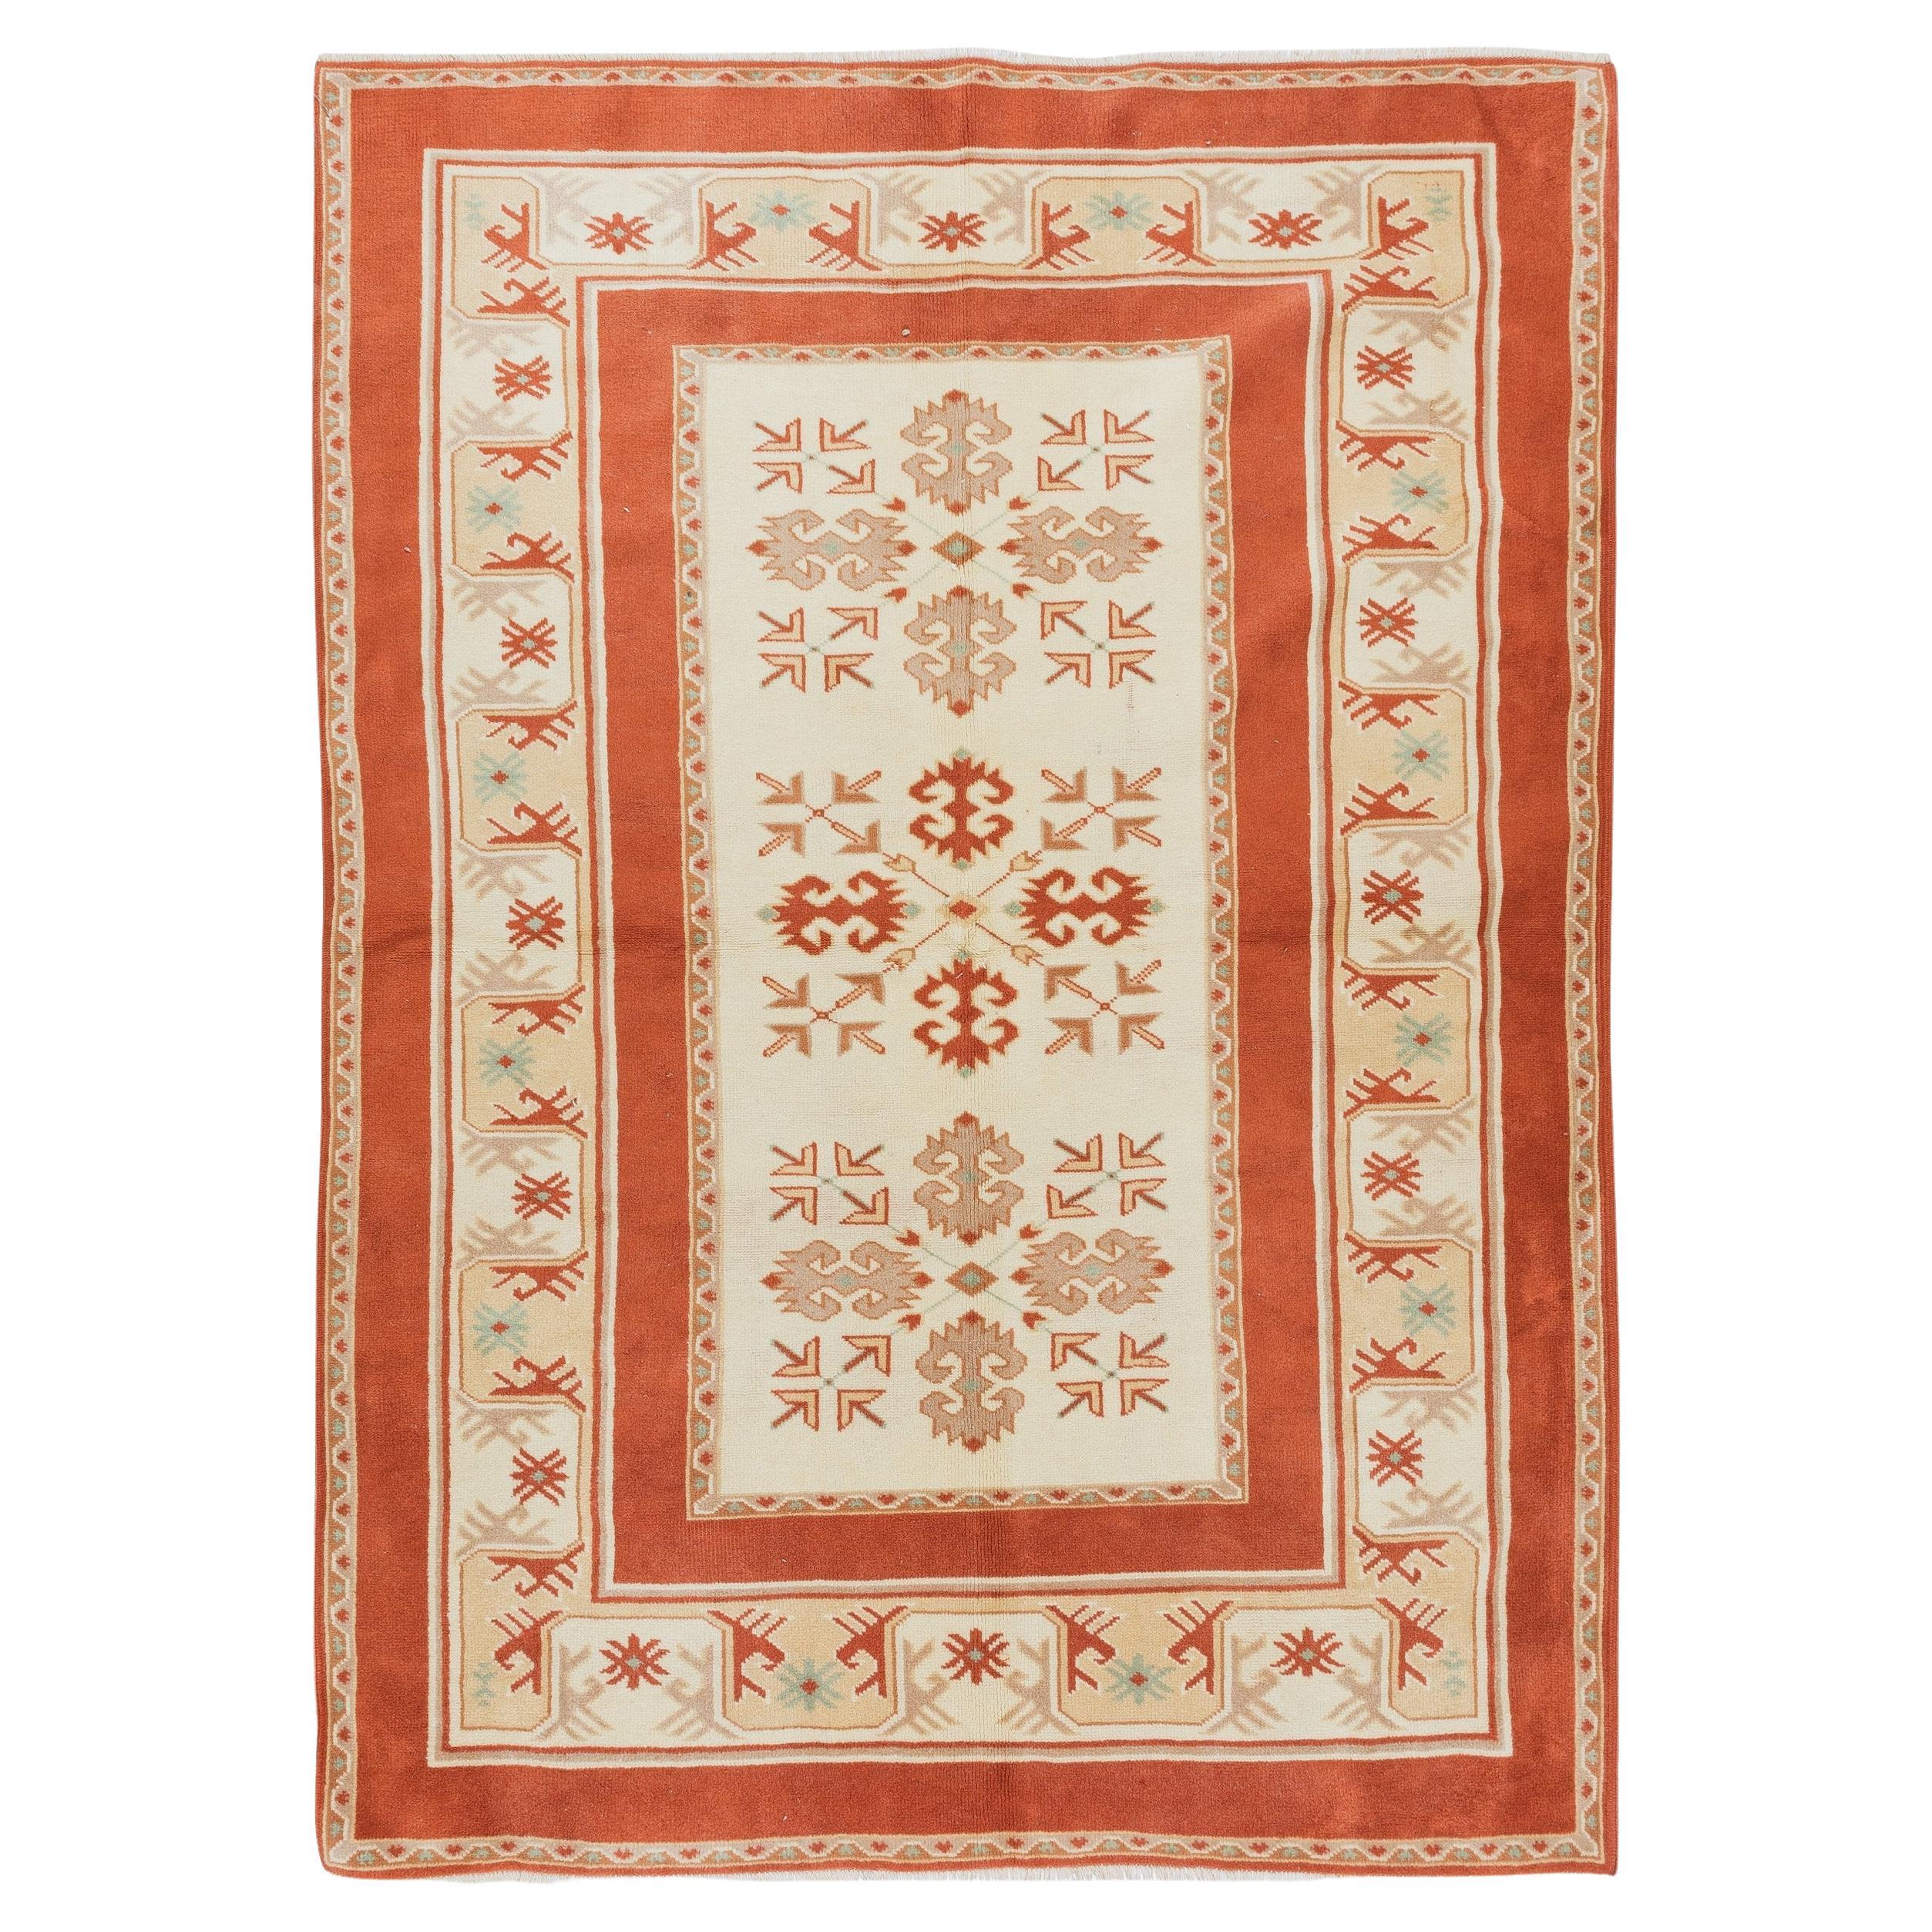 5x6.7 ft Modern Hand Knotted Turkish Area Rug in Red and Cream Colors, 100% Wool